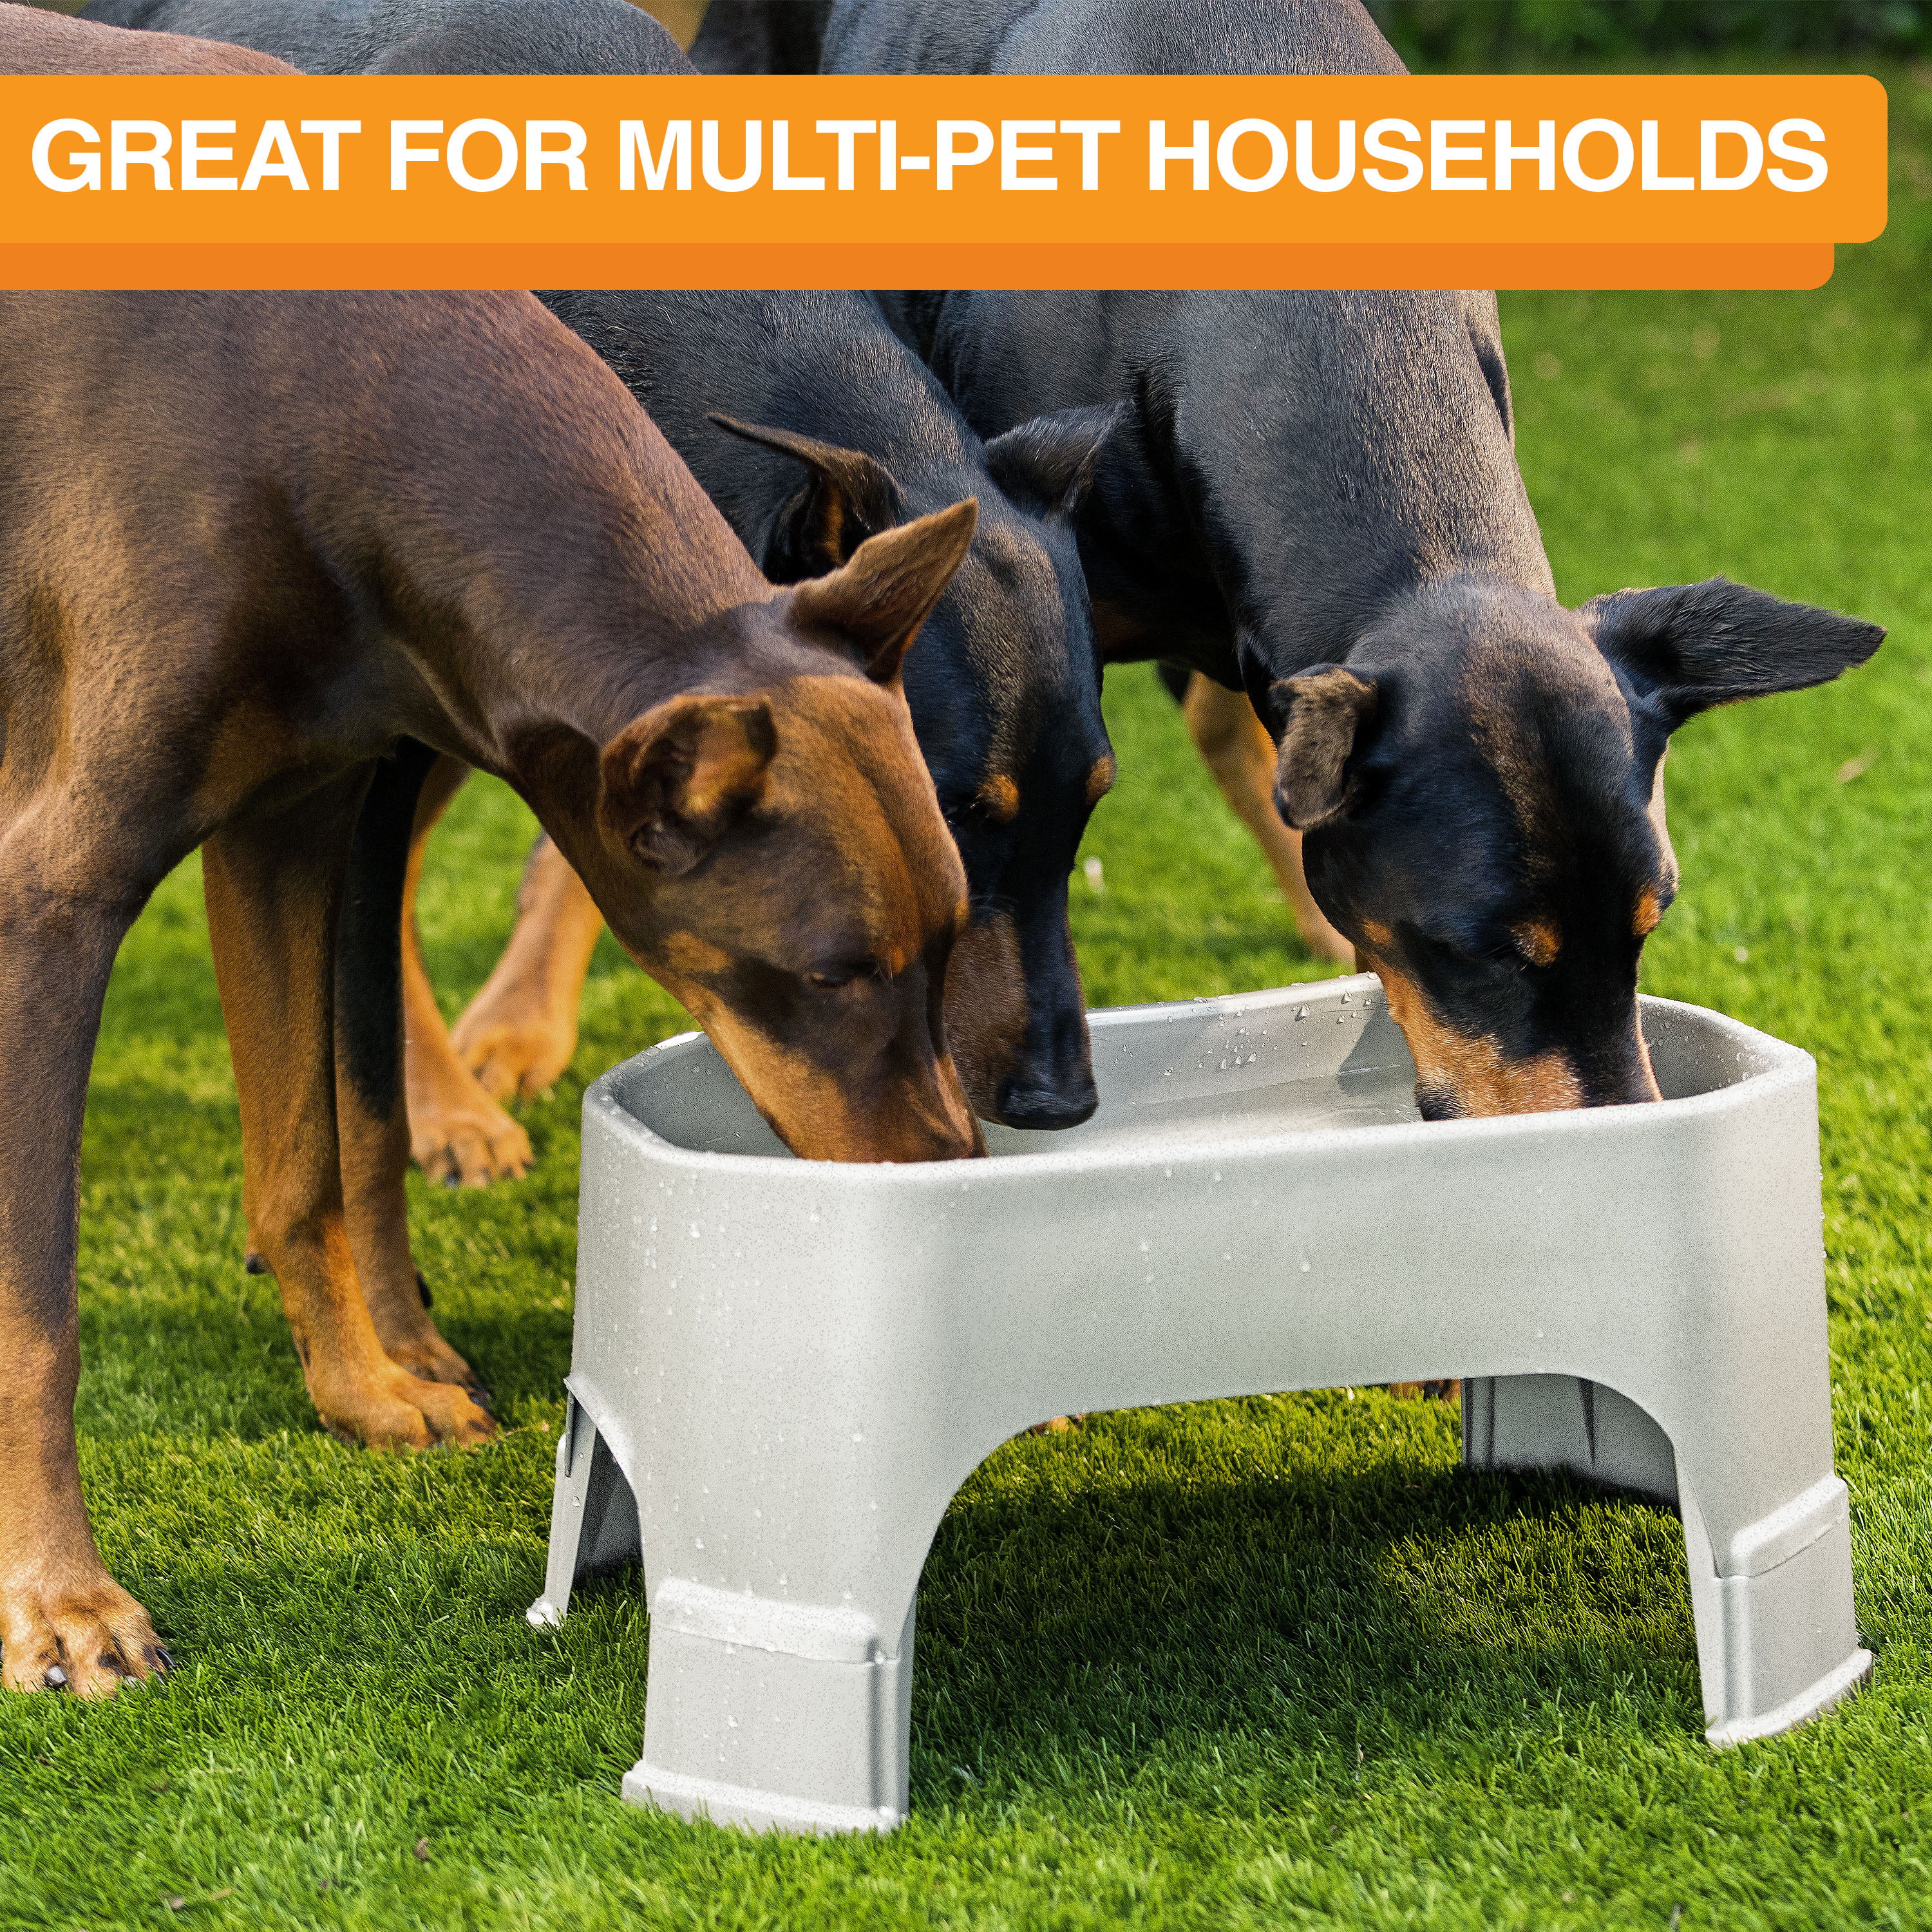 Neater Pet Brands Giant Bowl - Extra Large Water Bowl for Dogs - Perfect for Outdoors (2.25 Gallon Capacity, 288 oz) - Vanilla Bean